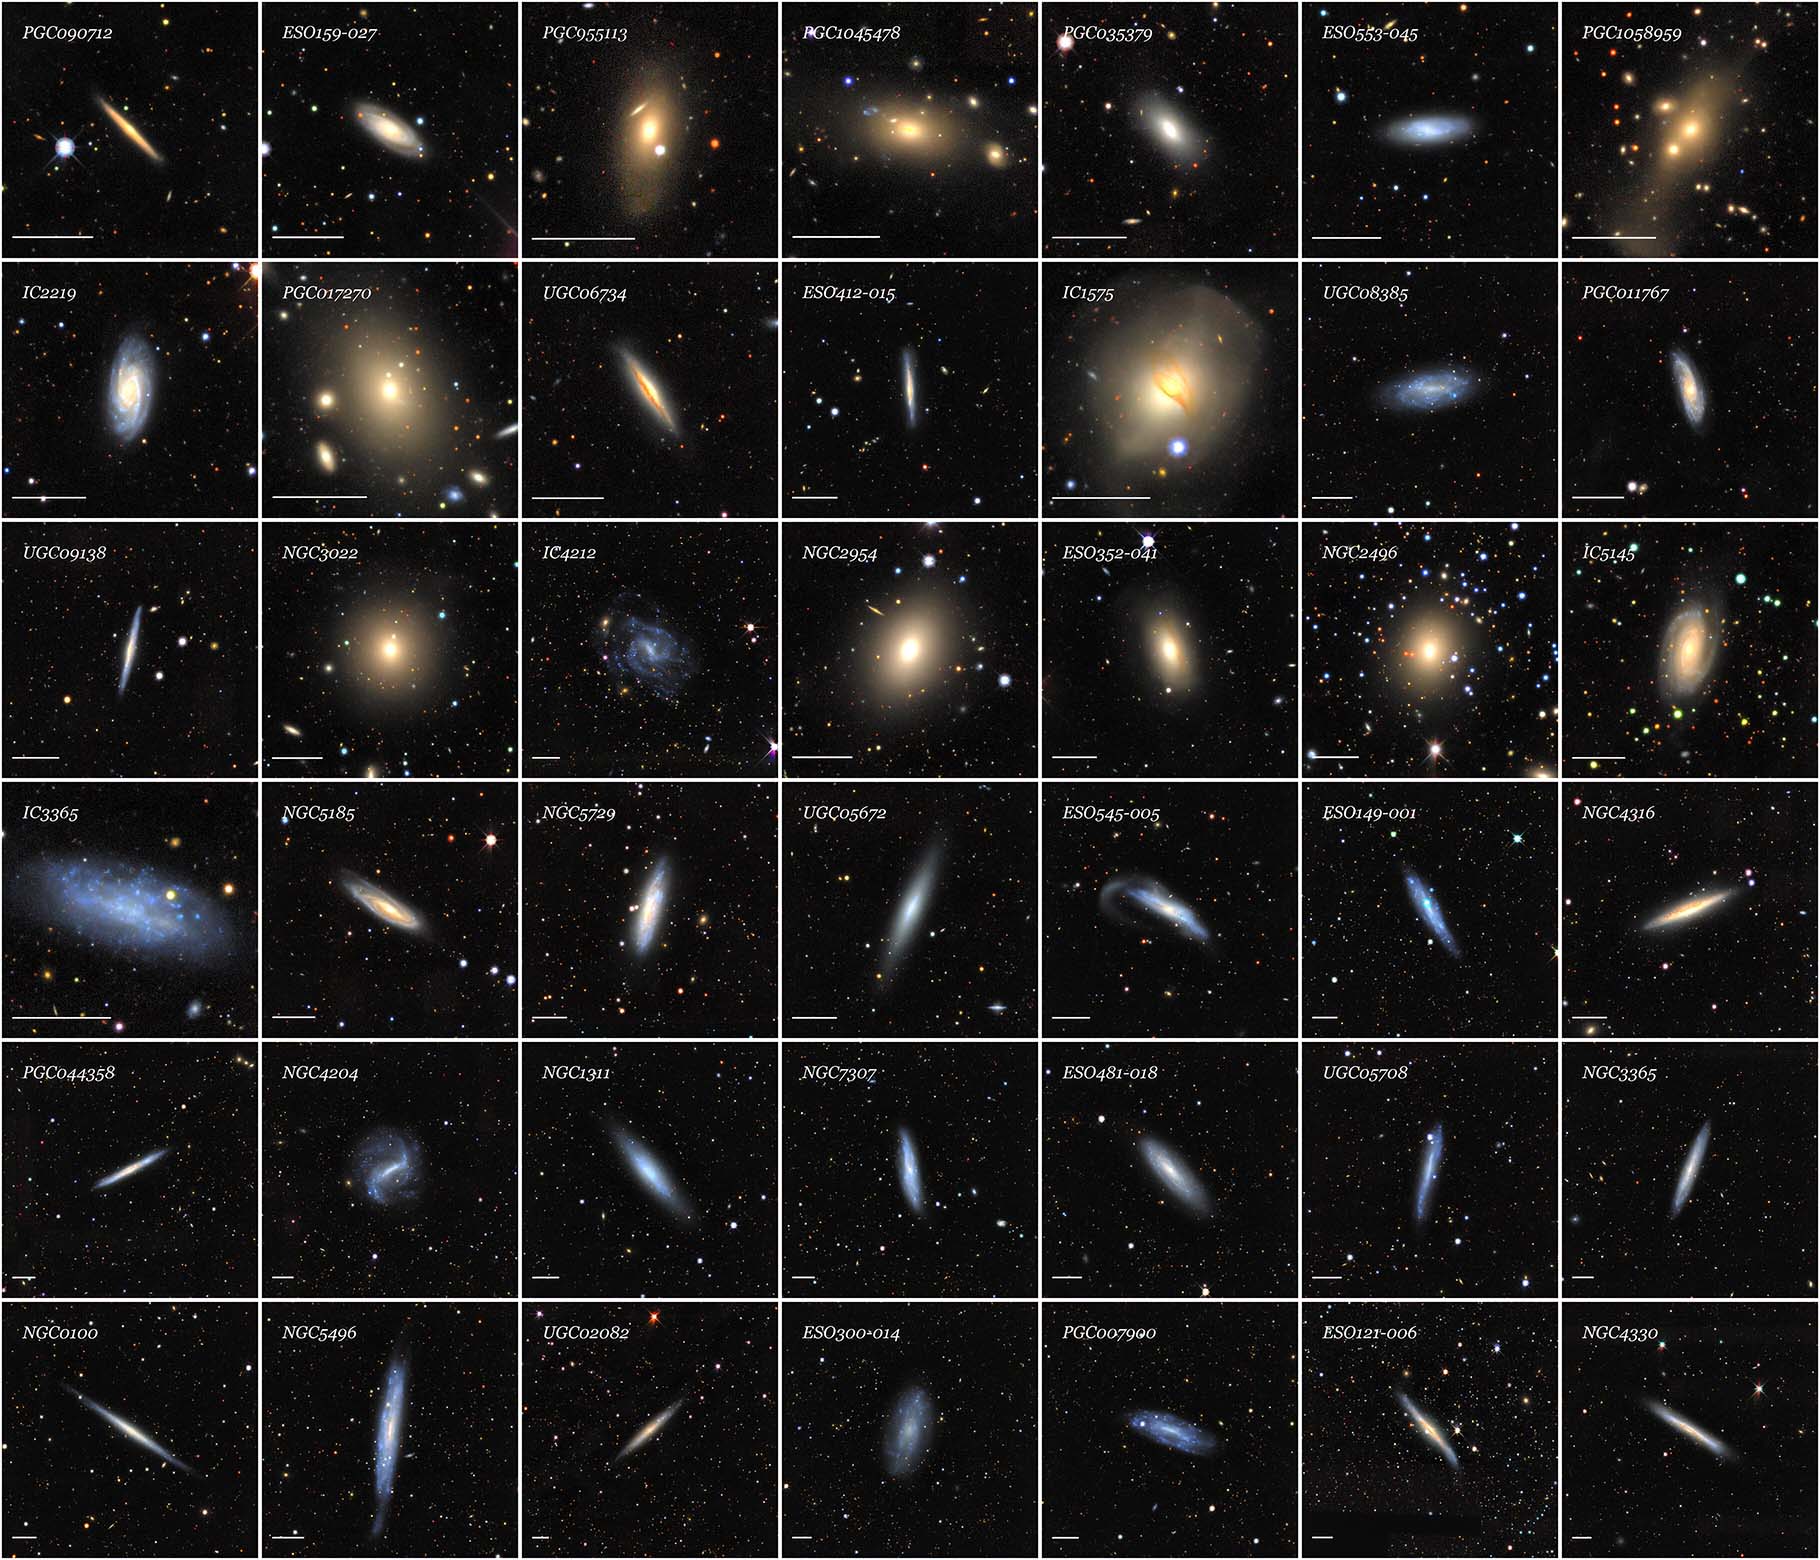 Optical mosaics of 42 galaxies from the SGA-2020 sorted by increasing angular diameter from the top-left to the bottom-right.